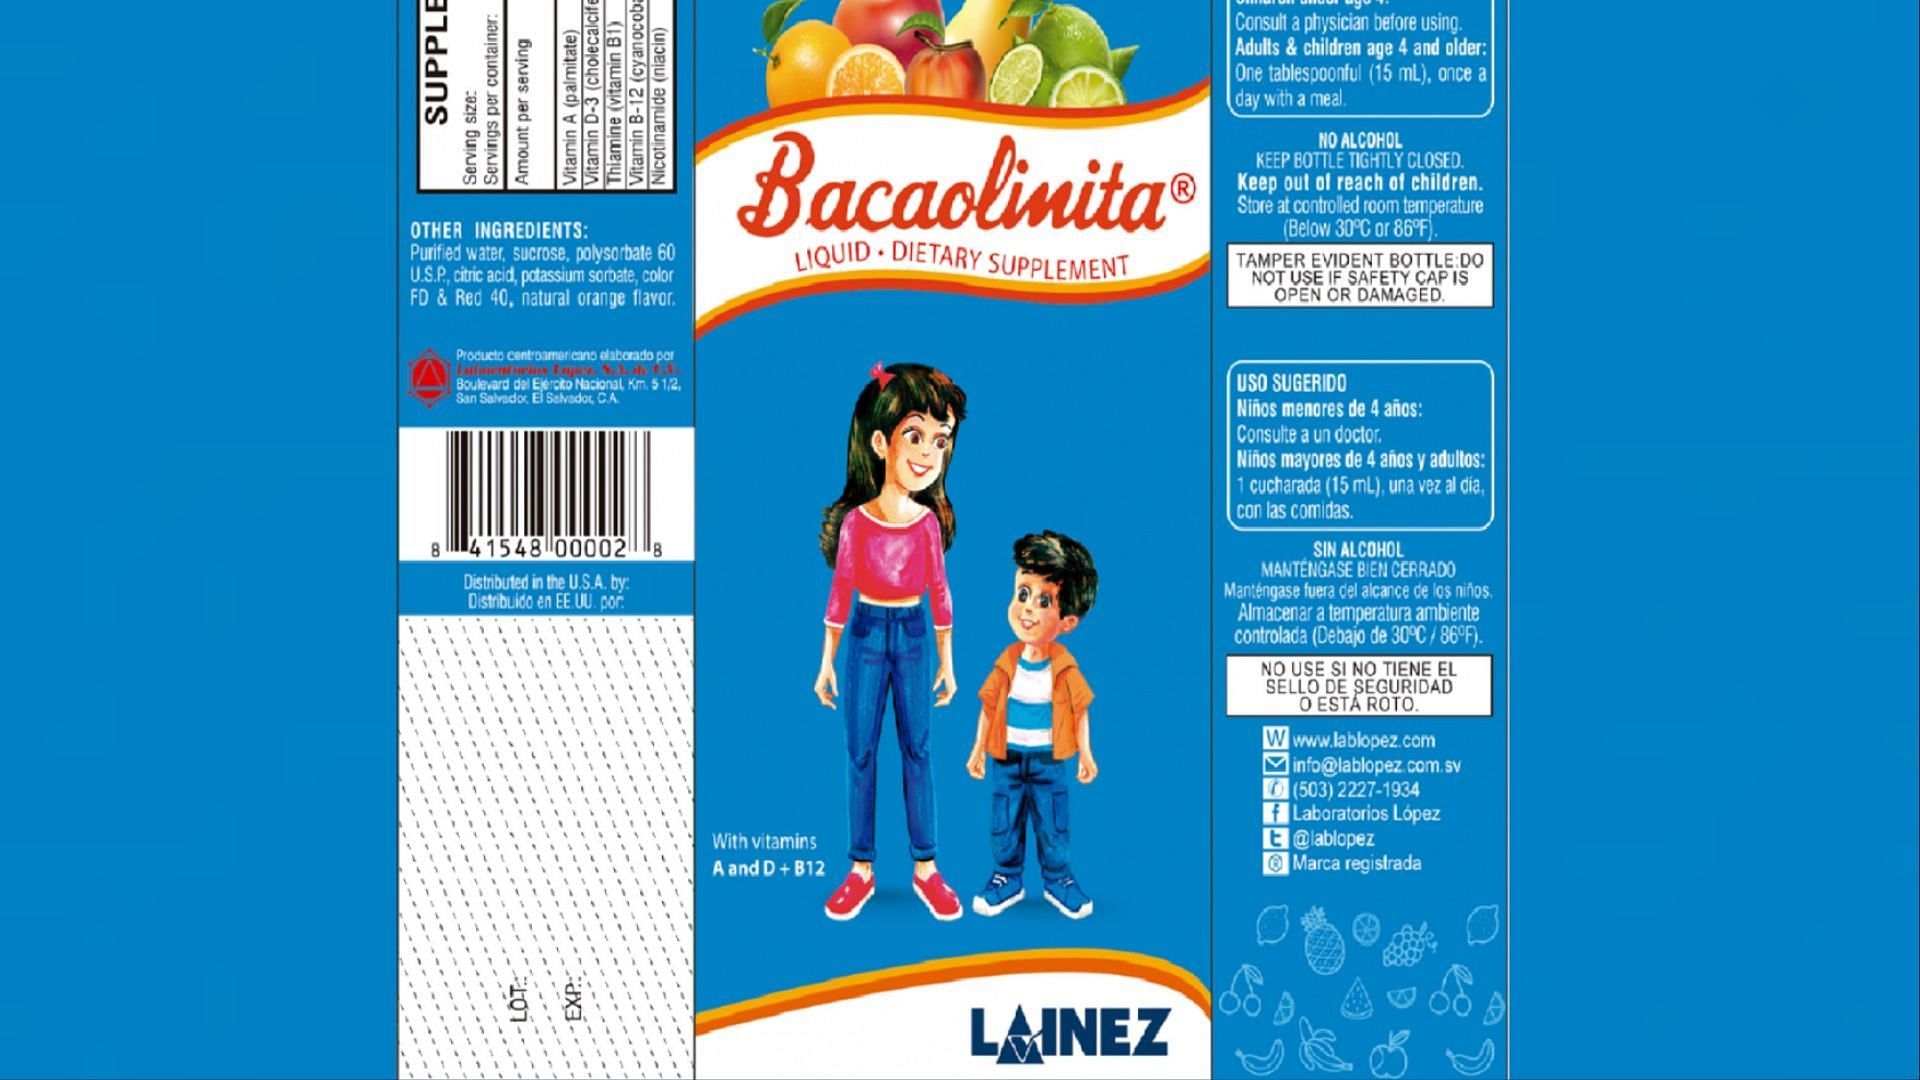 The recalled Bacaolinita dietary supplement product was sold in Delaware, Texas, Rhode Island, and California (Image via FDA)